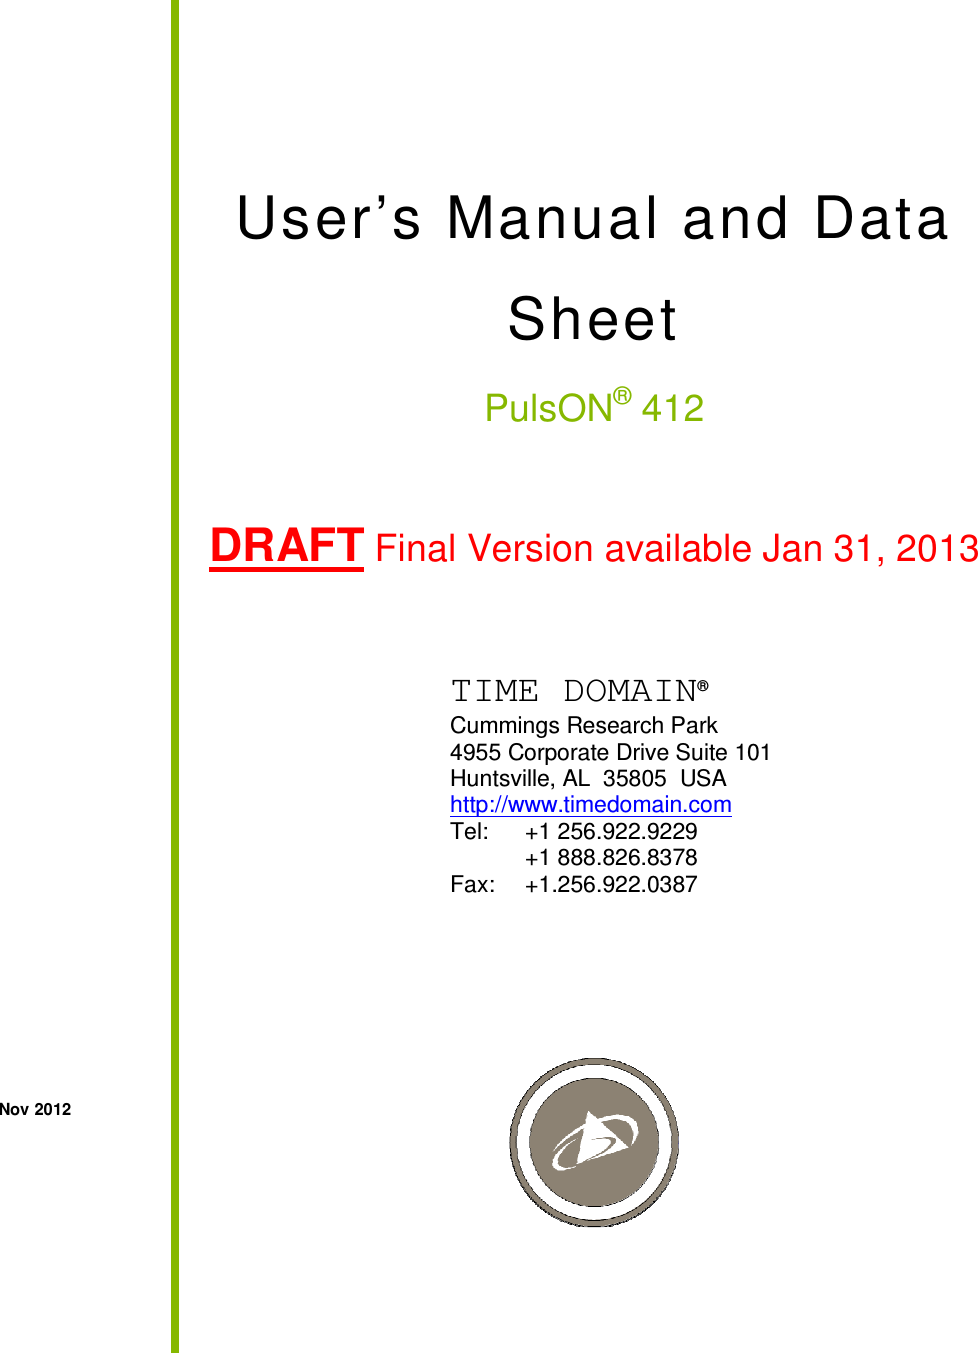   User’s Manual and Data Sheet     PulsON® 412   DRAFT Final Version available Jan 31, 2013           Nov 2012   TIME DOMAIN®   Cummings Research Park   4955 Corporate Drive Suite 101   Huntsville, AL  35805  USA http://www.timedomain.com Tel:   +1 256.922.9229   +1 888.826.8378  Fax:  +1.256.922.0387 